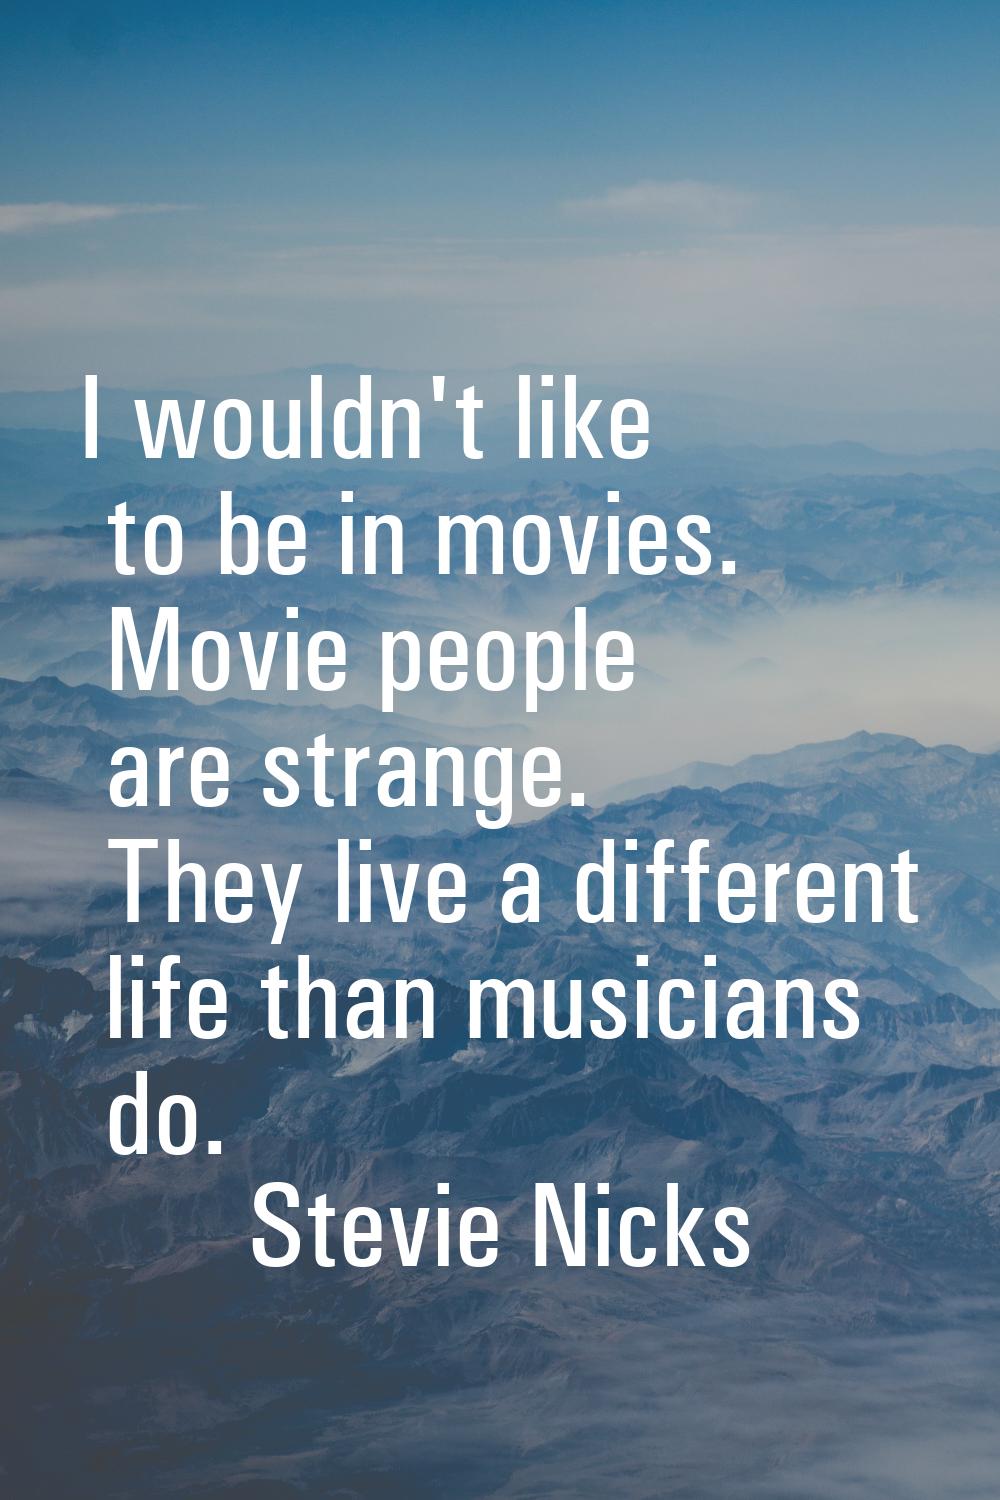 I wouldn't like to be in movies. Movie people are strange. They live a different life than musician